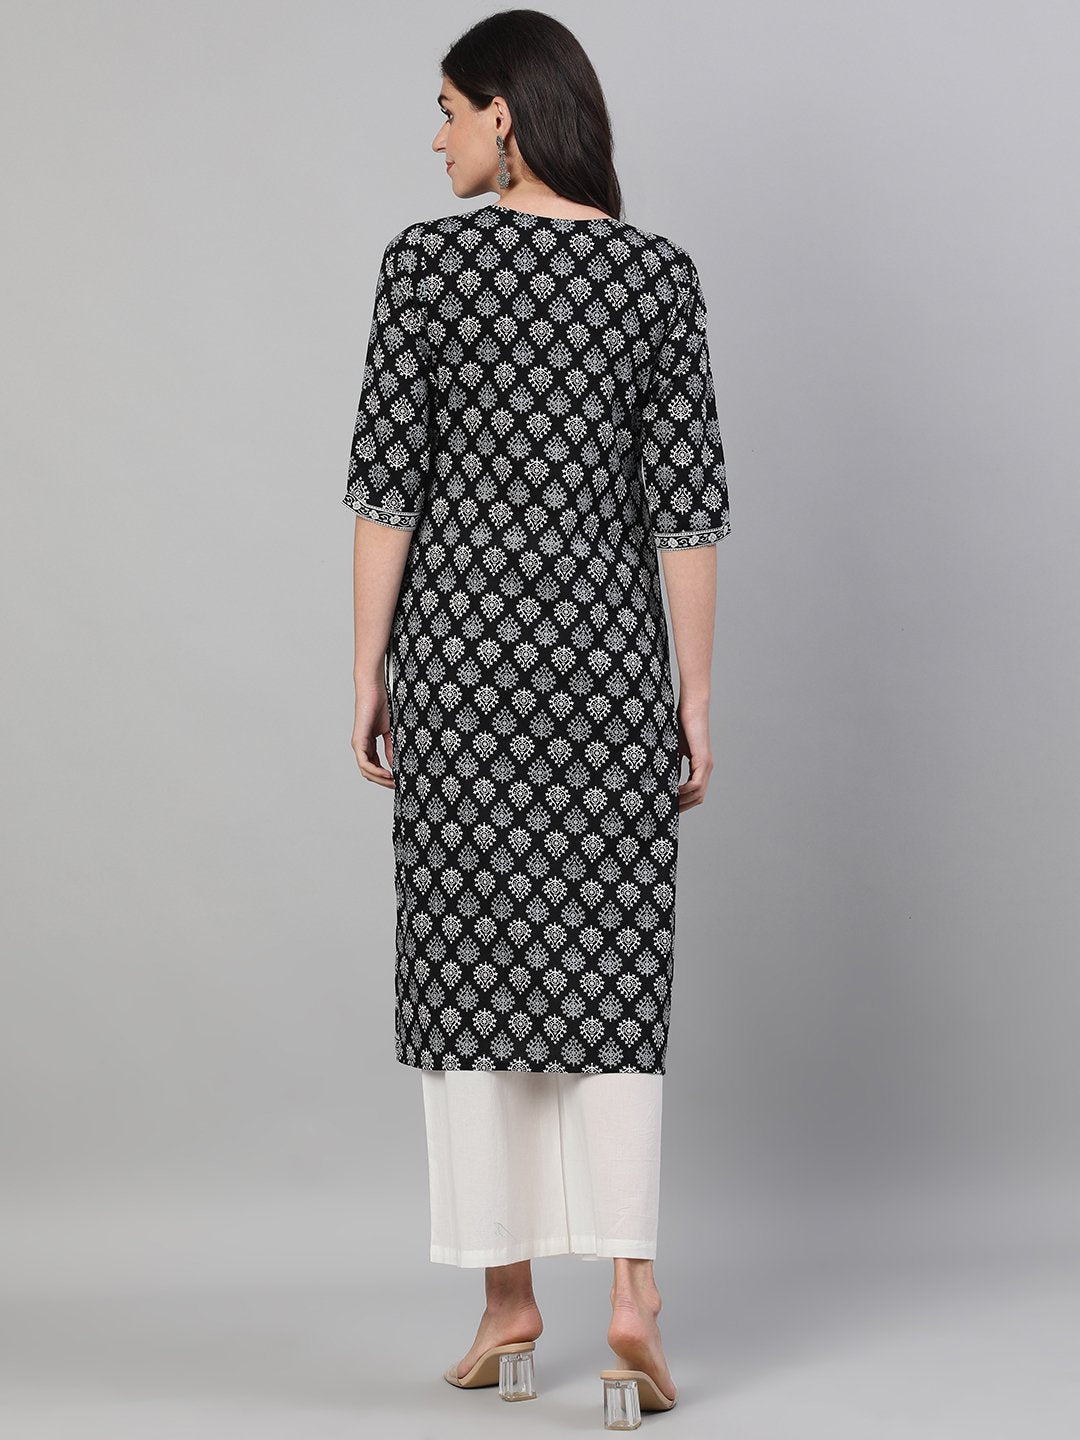 Women's Black Calf Length Three-Quarter Sleeves Straight Ethnic Motif Printed Cotton Kurta With Pockets And Face Mask - Nayo Clothing